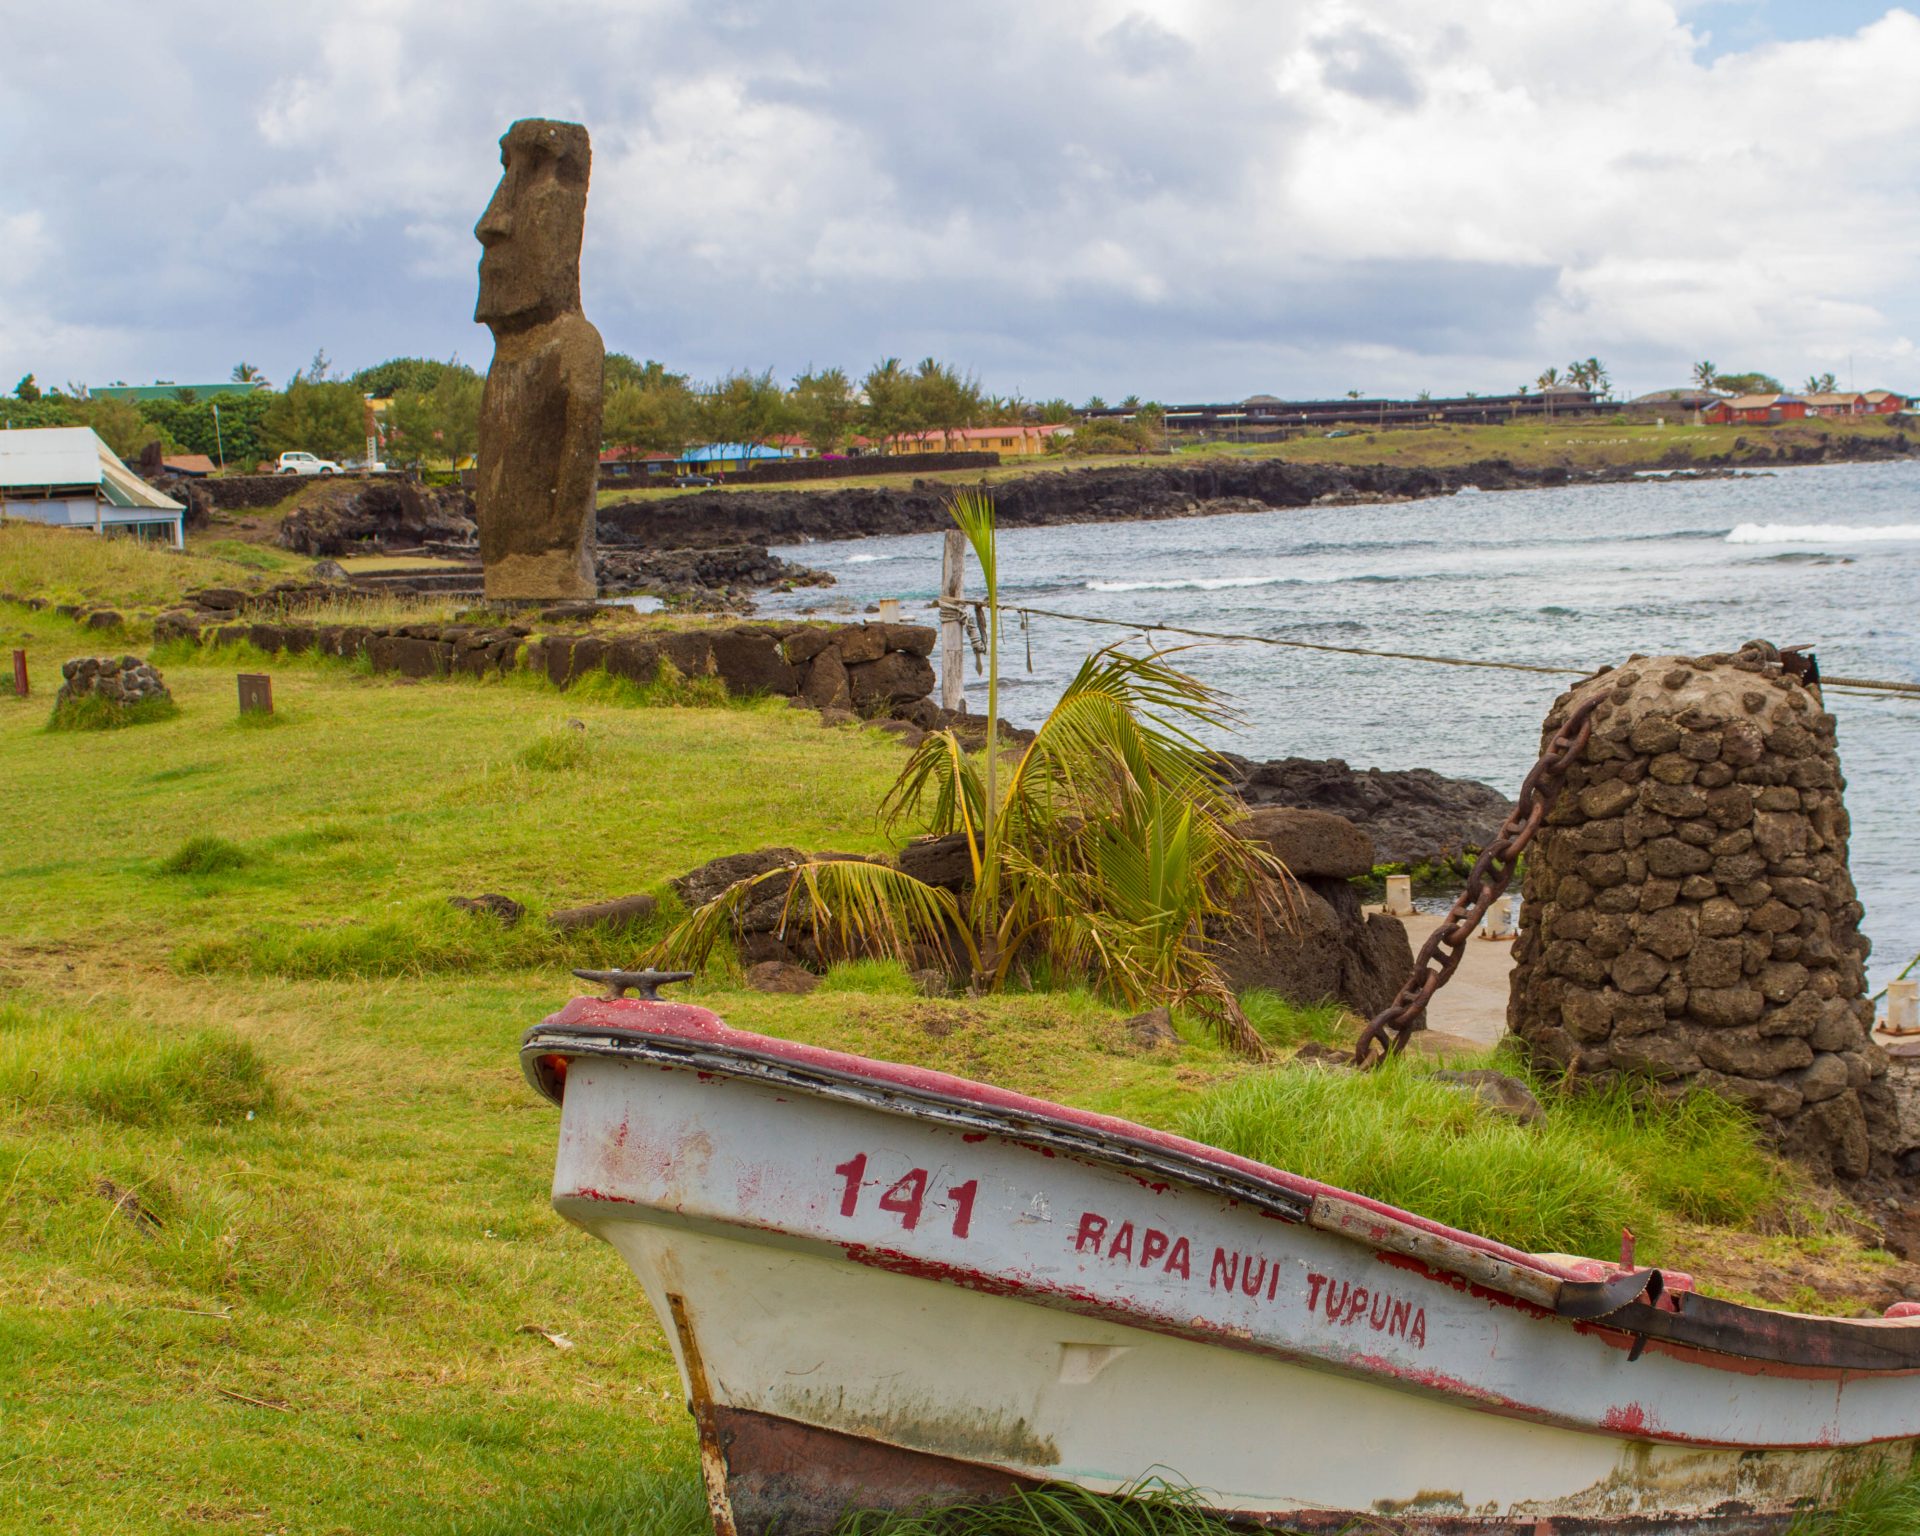 A small fishing boat sits on the green grass next to the ocean with a moai sculputre and a small town in the background